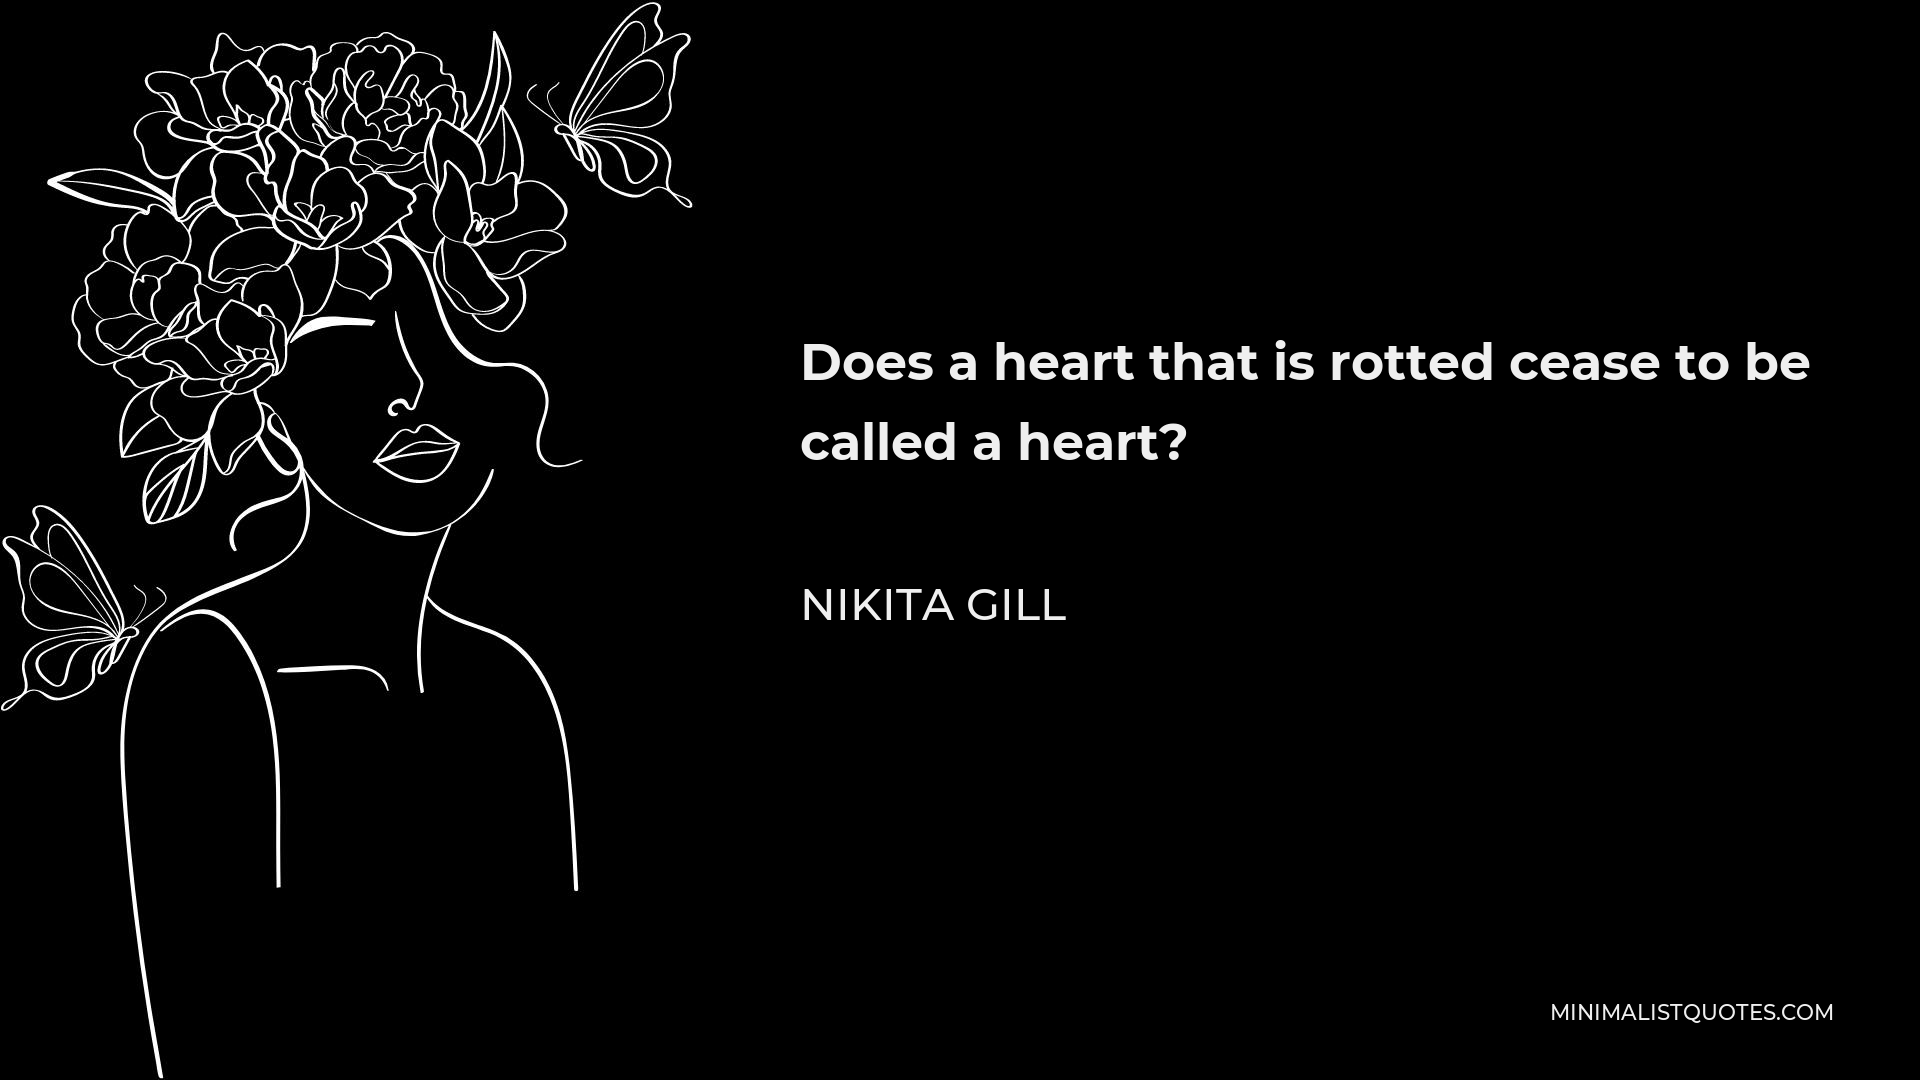 Nikita Gill Quote - Does a heart that is rotted cease to be called a heart?